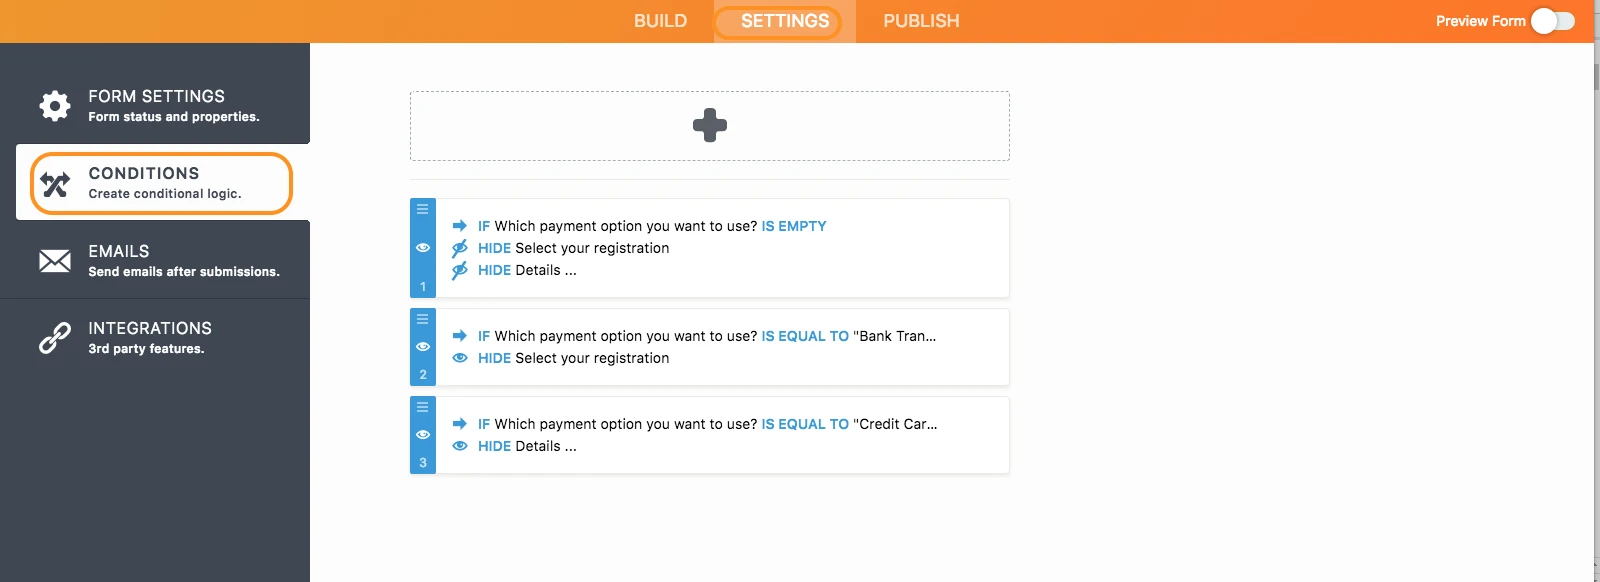 if I do not have a credit card how I could end the registration form ? Image 4 Screenshot 93